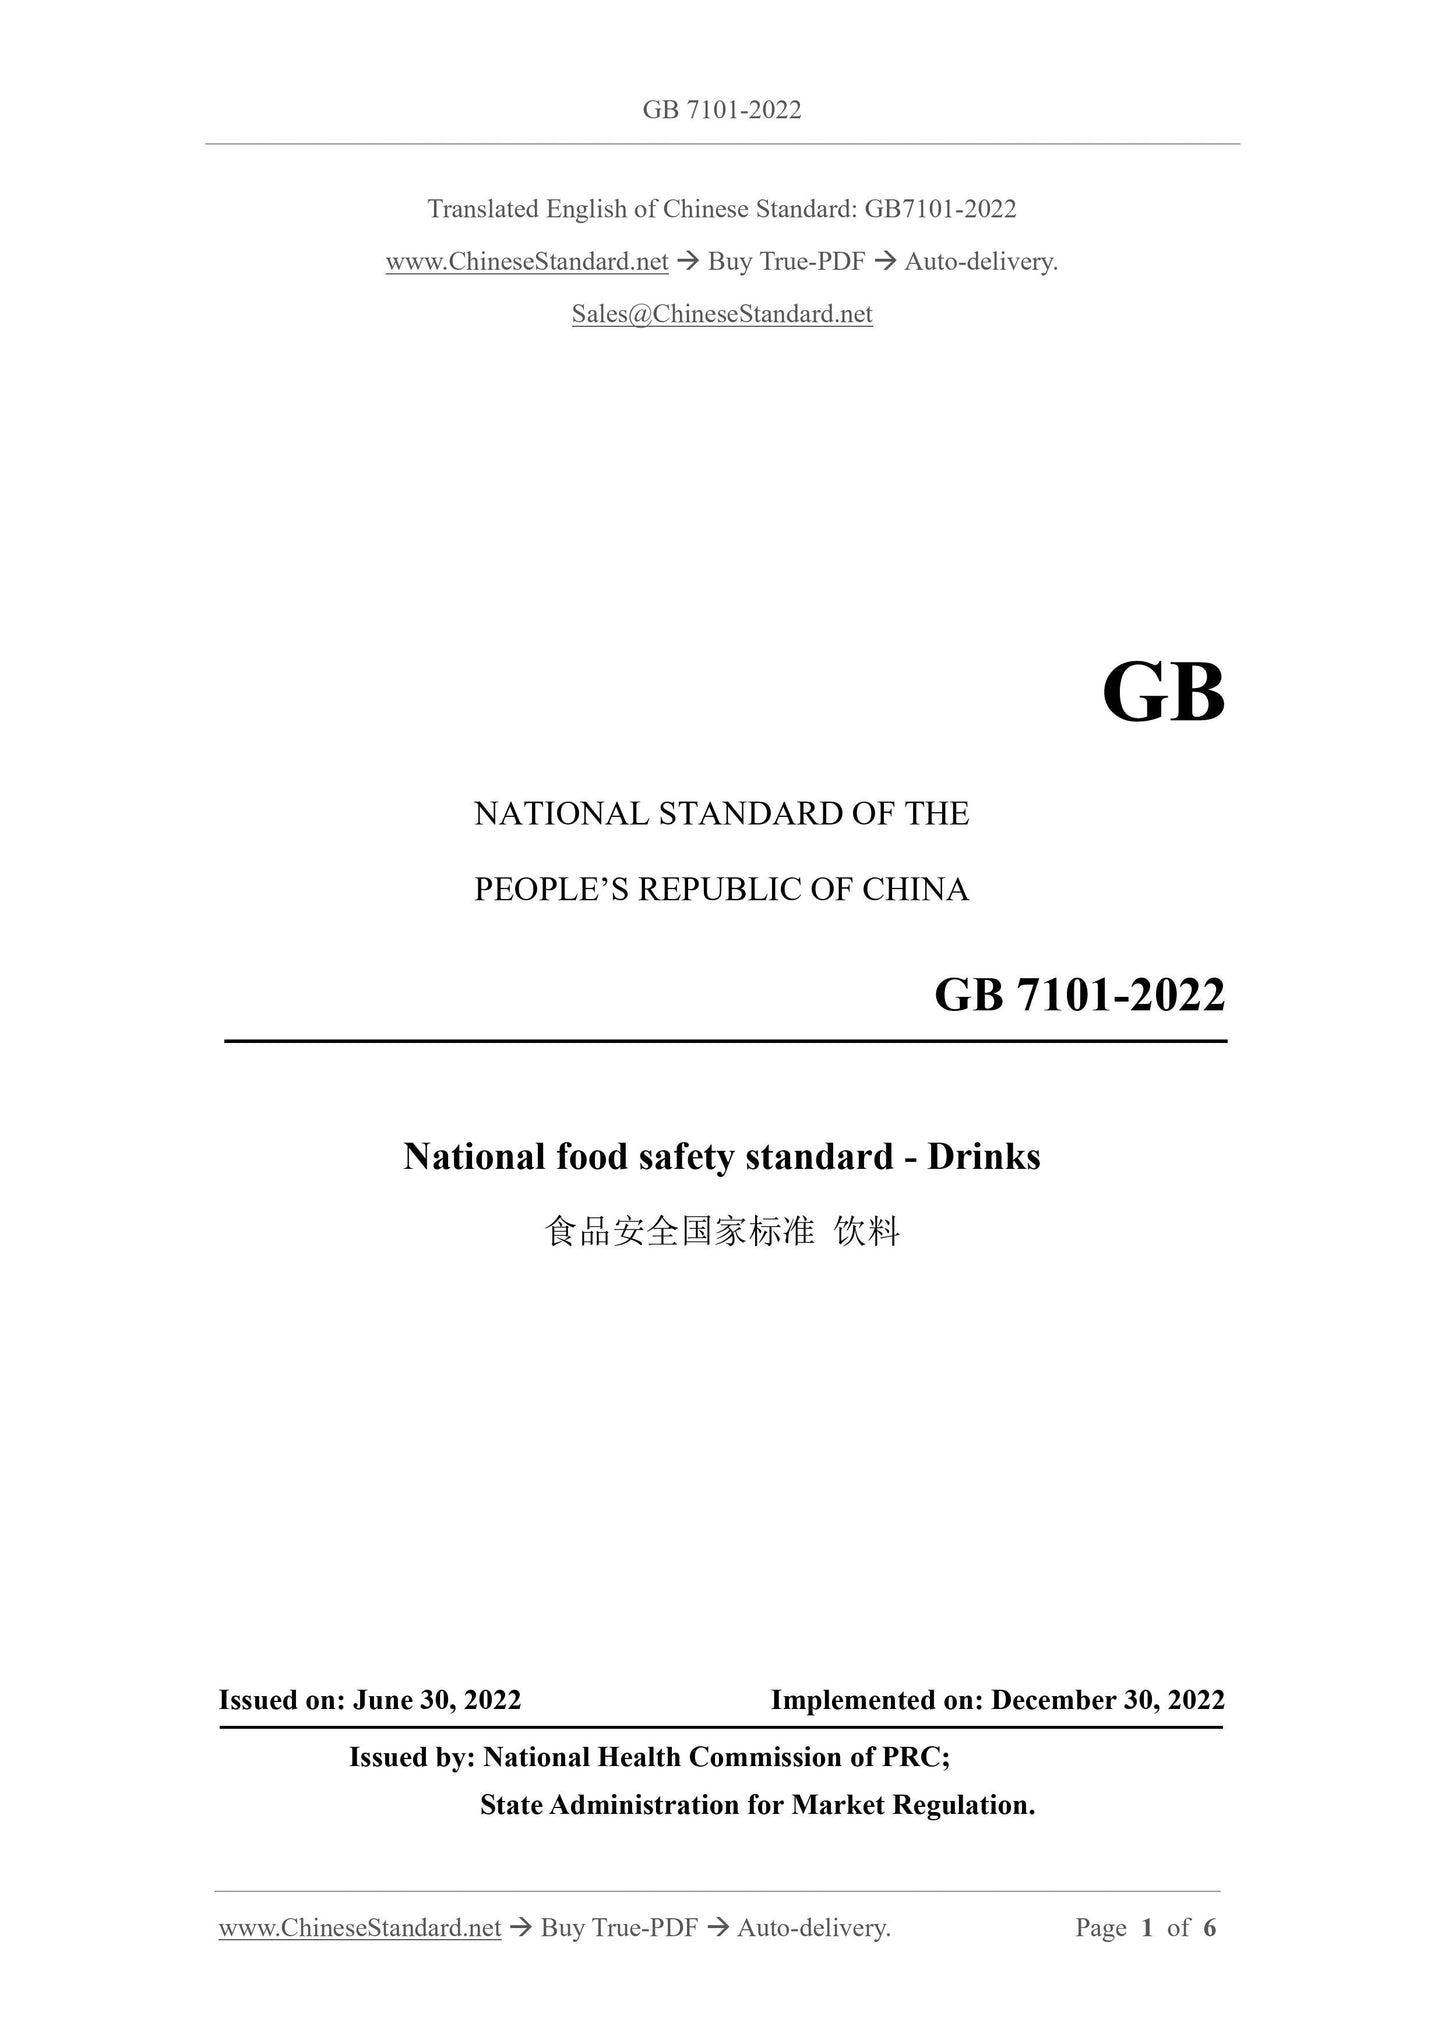 GB 7101-2022 Page 1